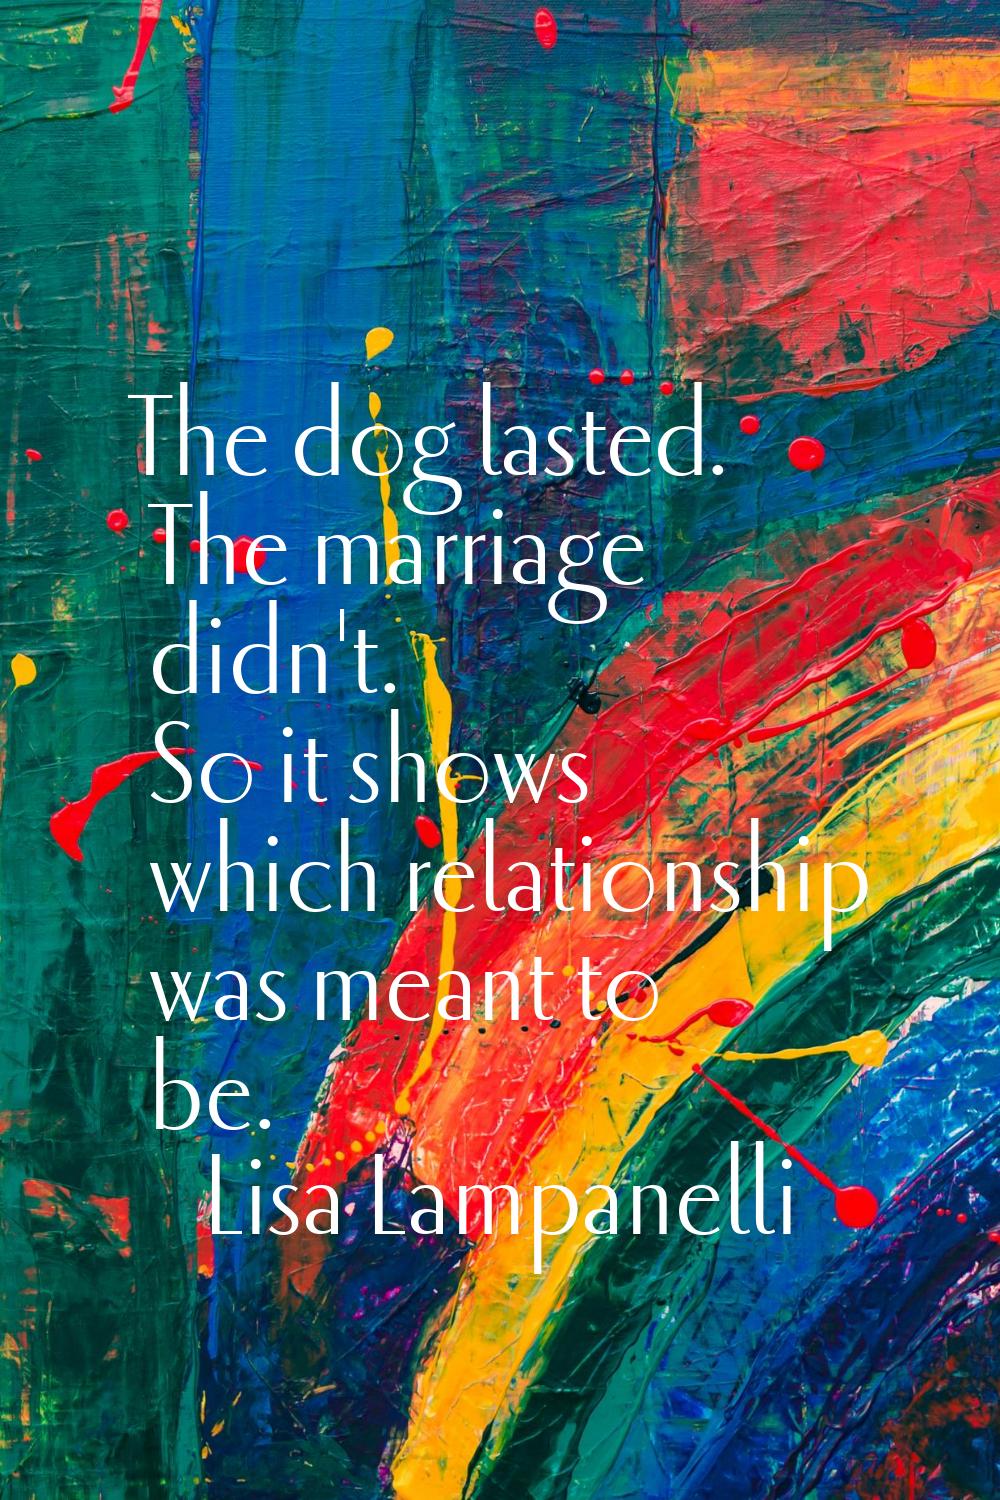 The dog lasted. The marriage didn't. So it shows which relationship was meant to be.